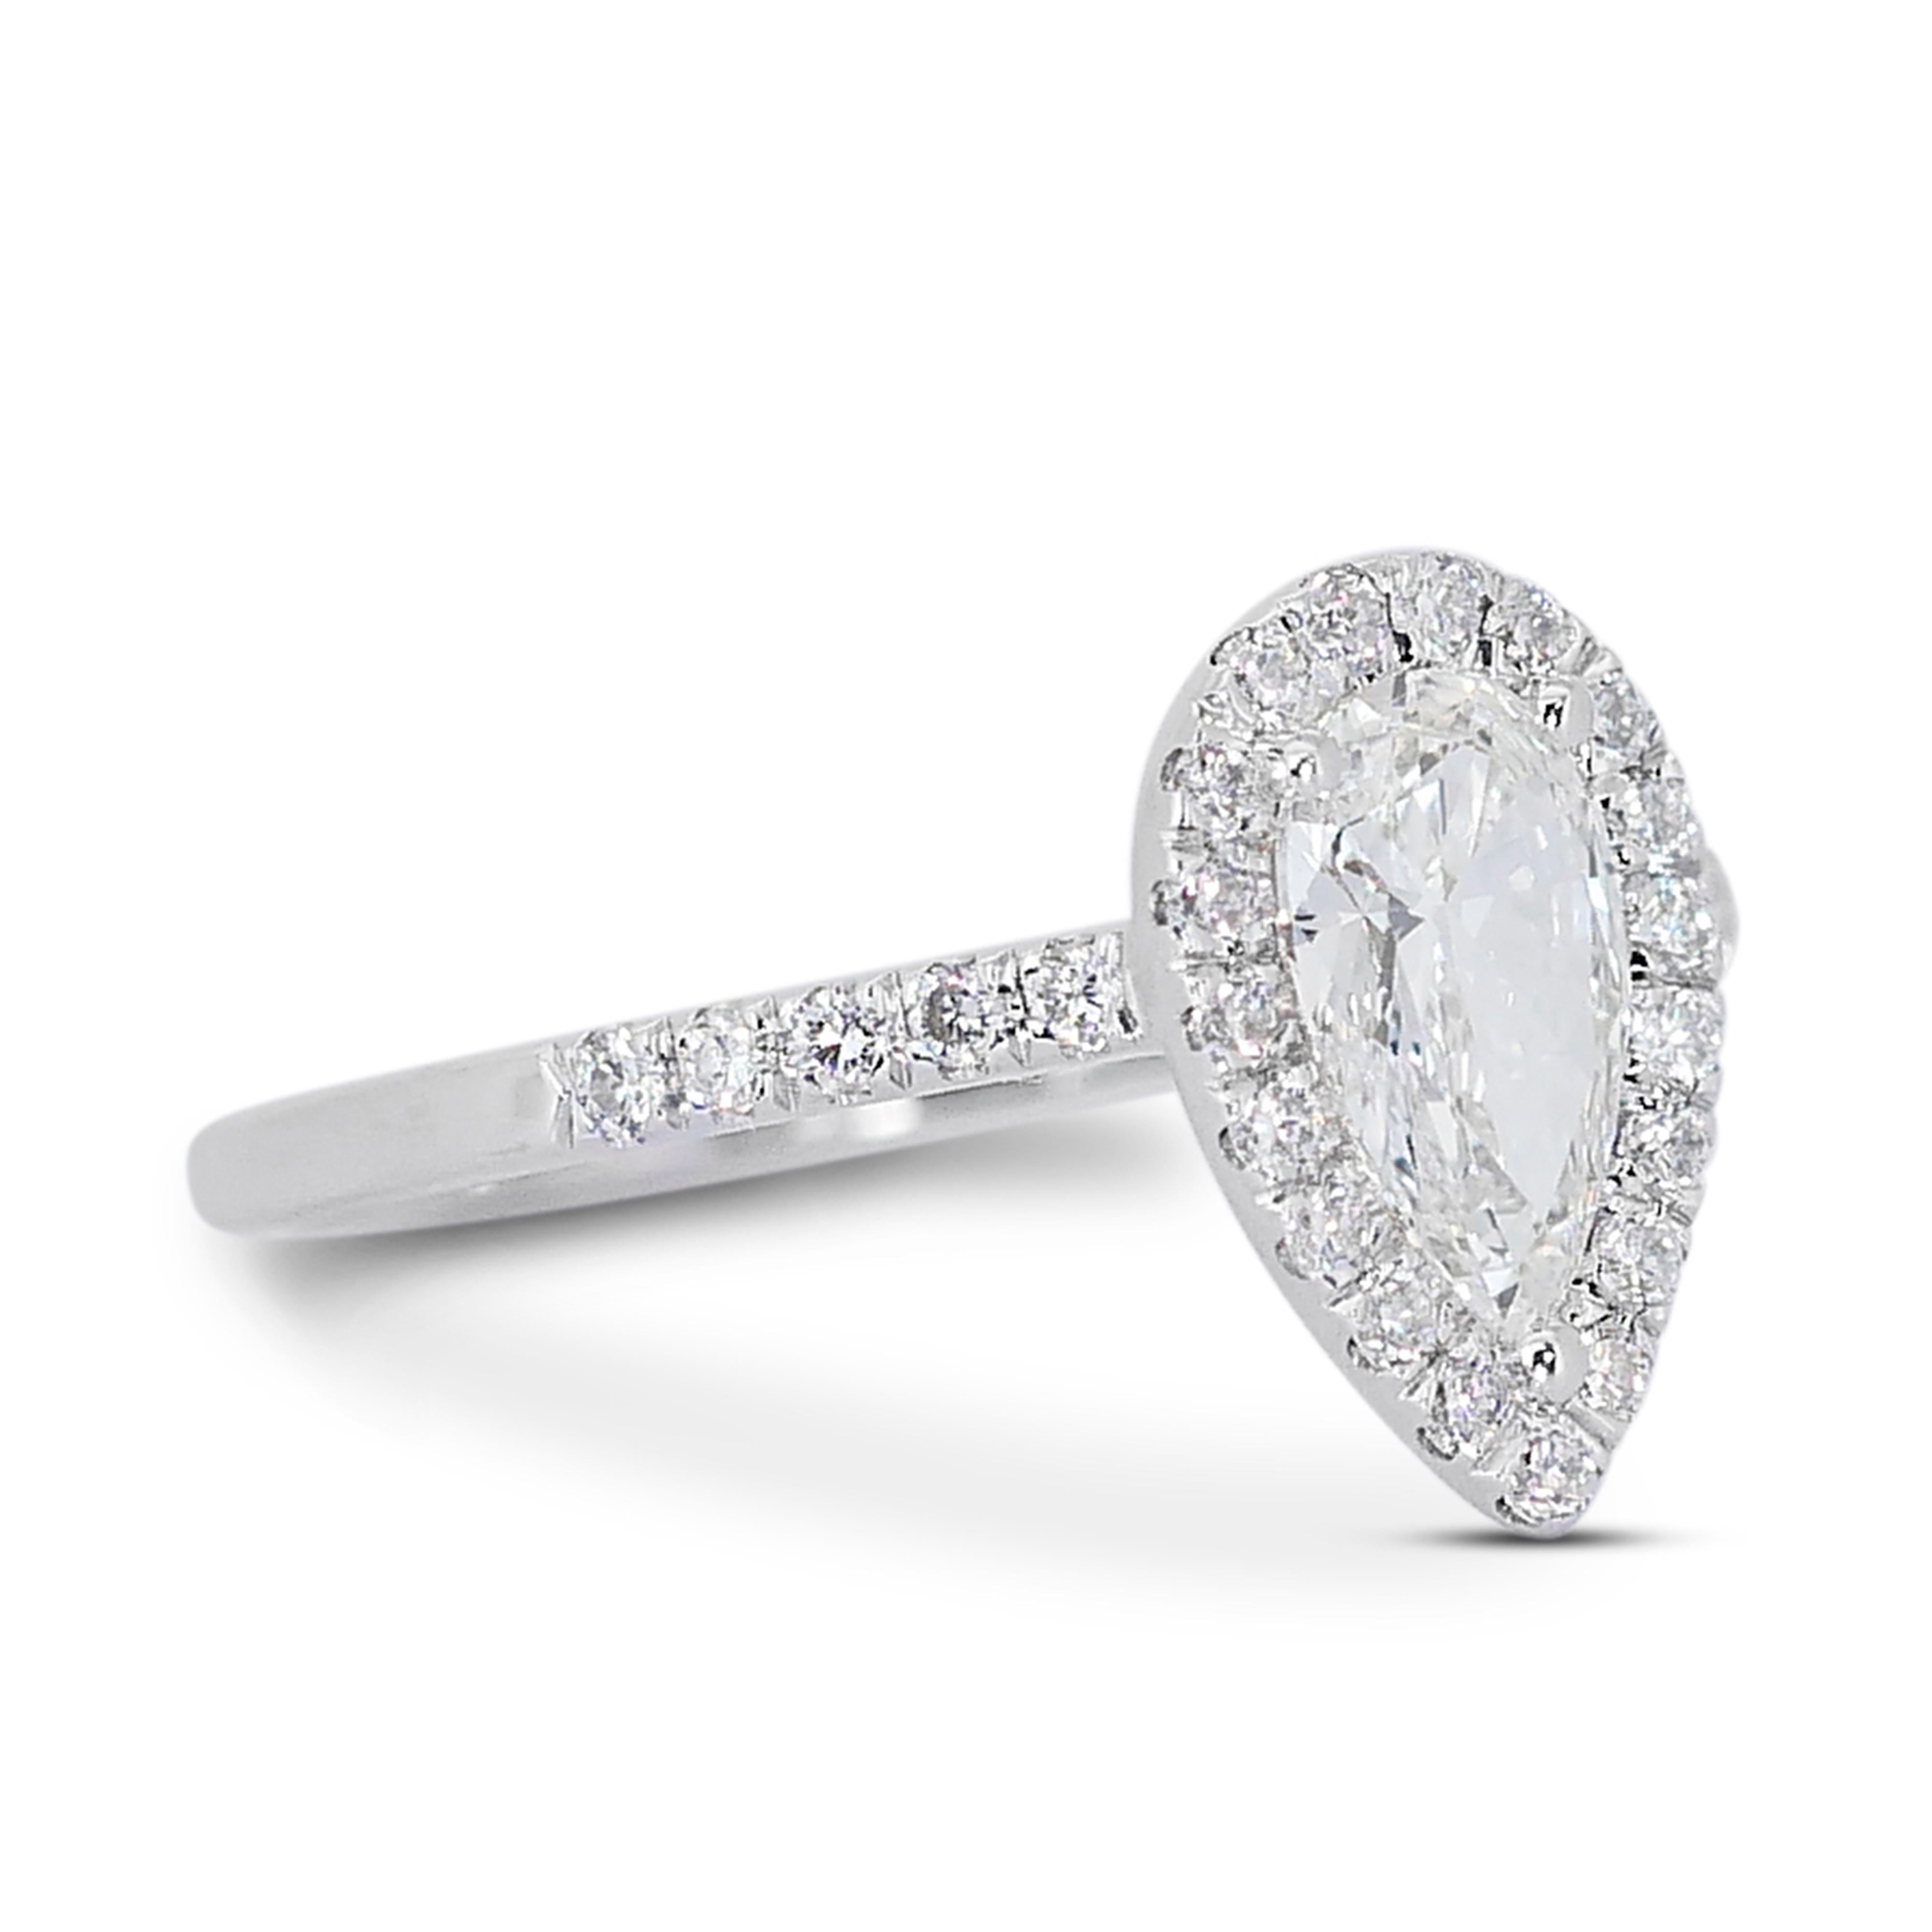 Pear Cut Stunning 1.97ct Pear-Shaped Diamond Halo Ring in 18k White Gold - GIA Certified For Sale